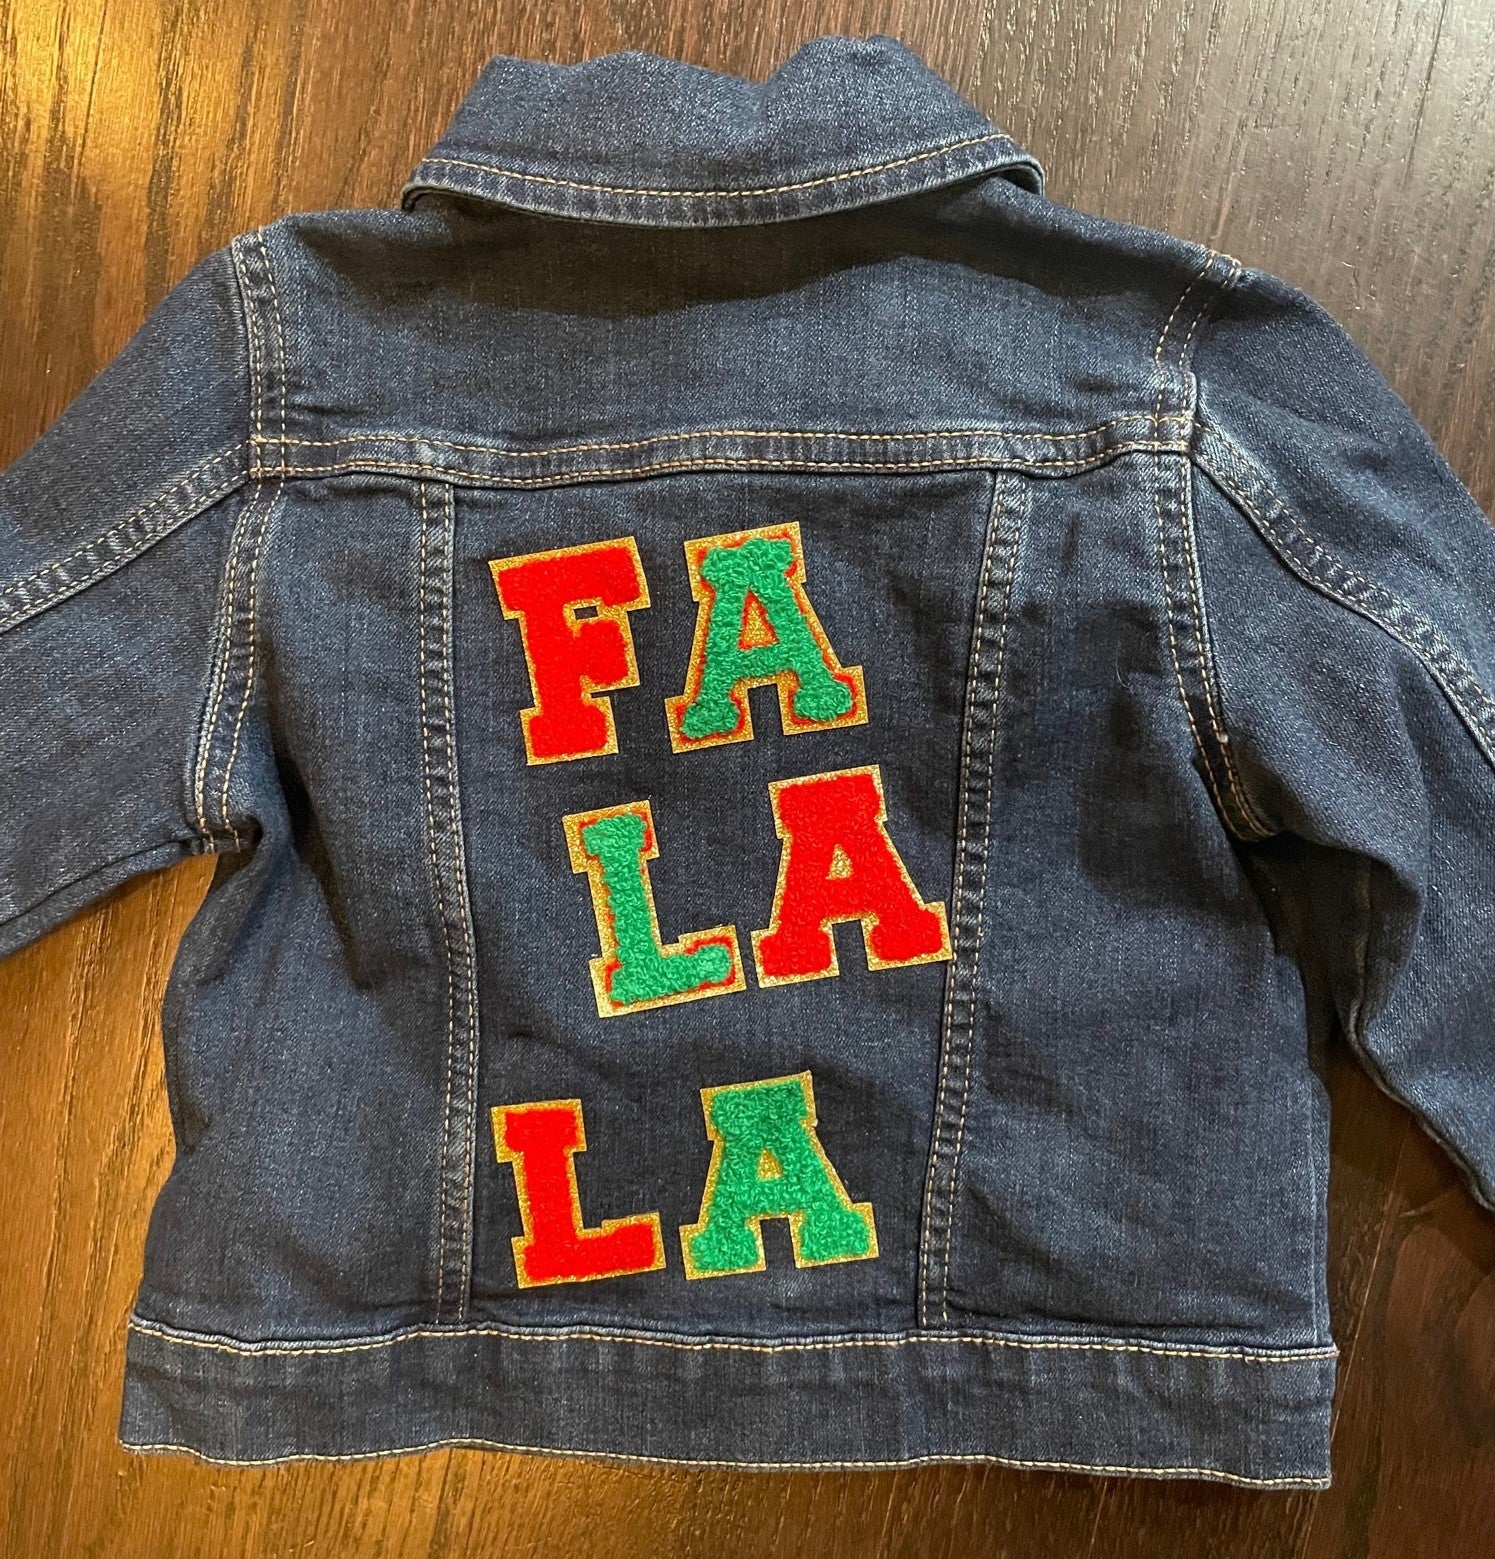 Buy BOYS DENIM JACKET Hand Painted Personalised, Custom, Alternative Punk Denim  Jean Jacket With Embroidered Patches, Unique Zaradreamland Style Online in  India - Etsy